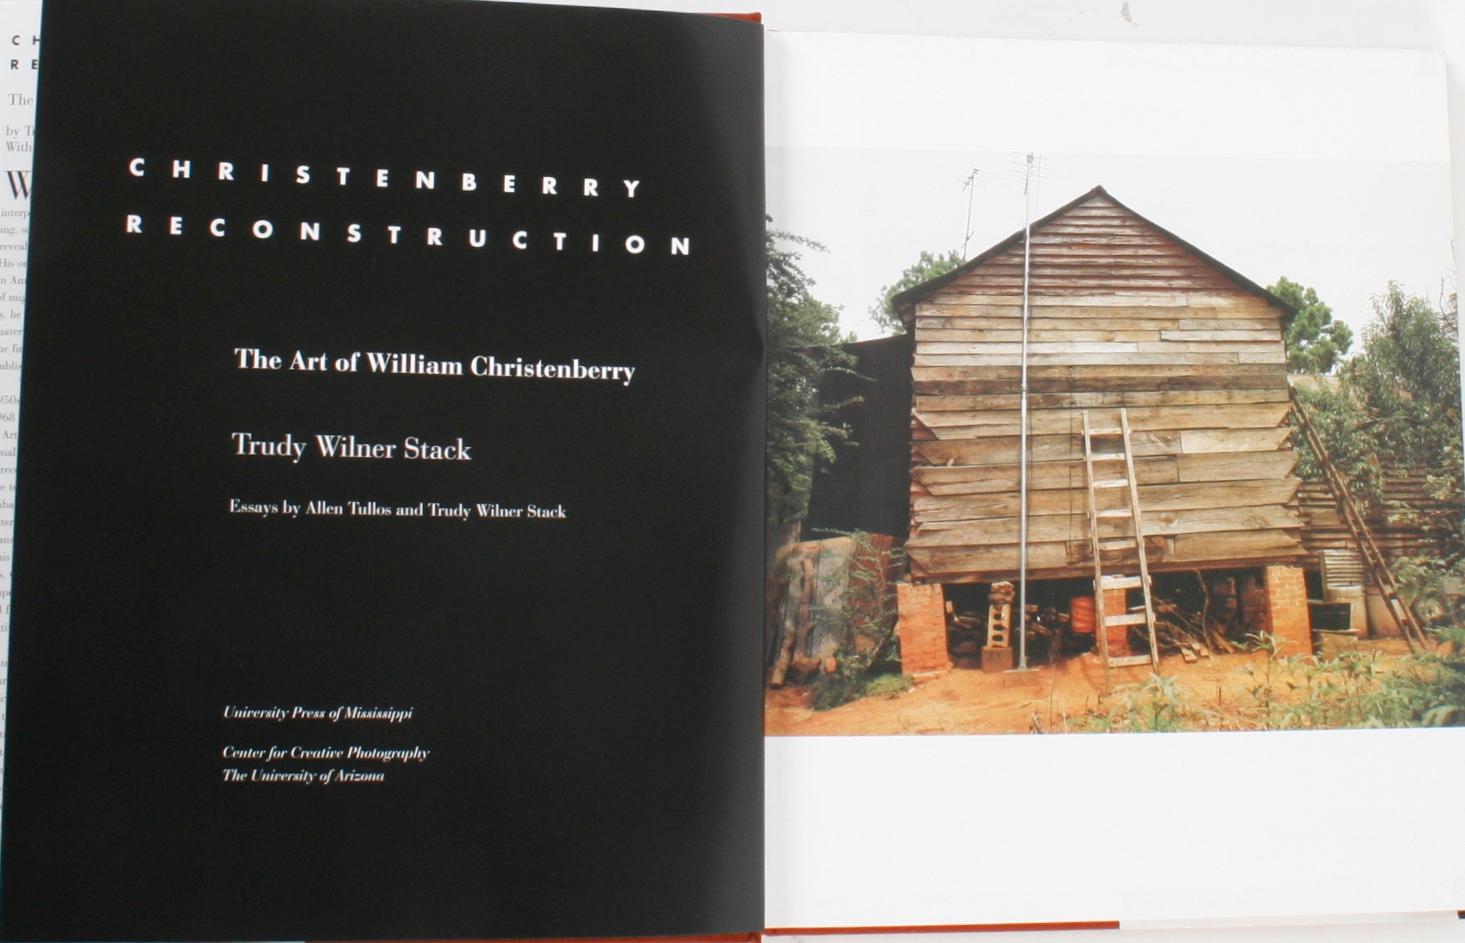 The Art of William Christenberry. Jackson: University Press of Mississippi, 1996. 1st Ed hardcover with dust jacket. 207 pp. A comprehensive survey published in conjunction with the traveling exhibition 